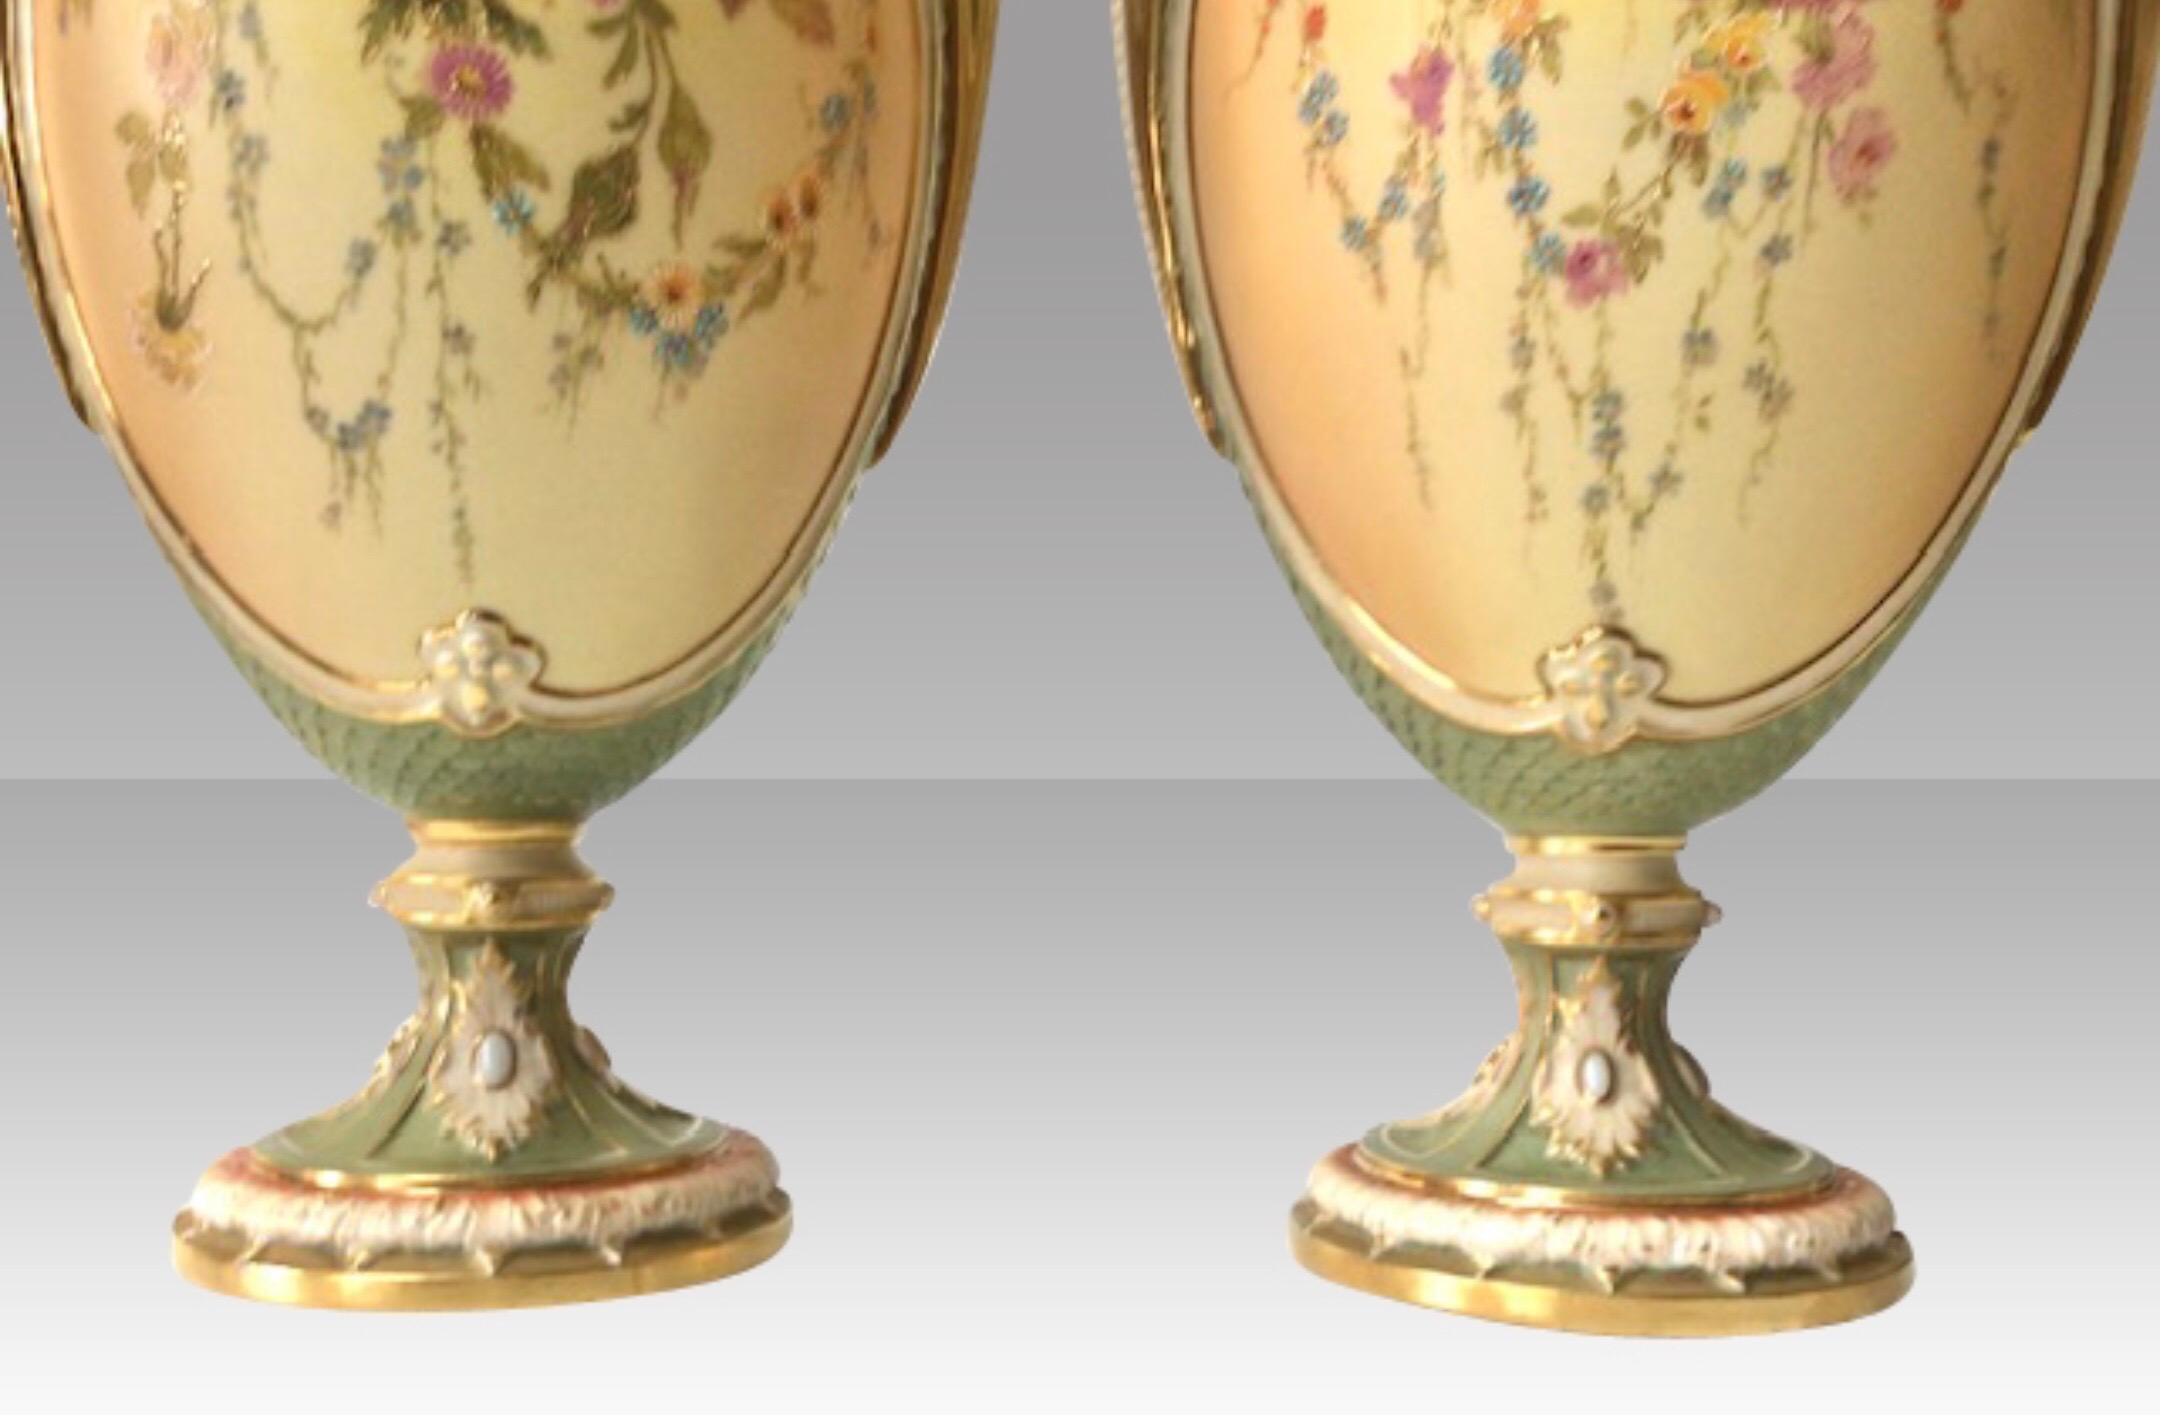 Ceramic Pair of Large Antique Blush & Turquoise Royal Worcester Vases & Covers by W Hale For Sale